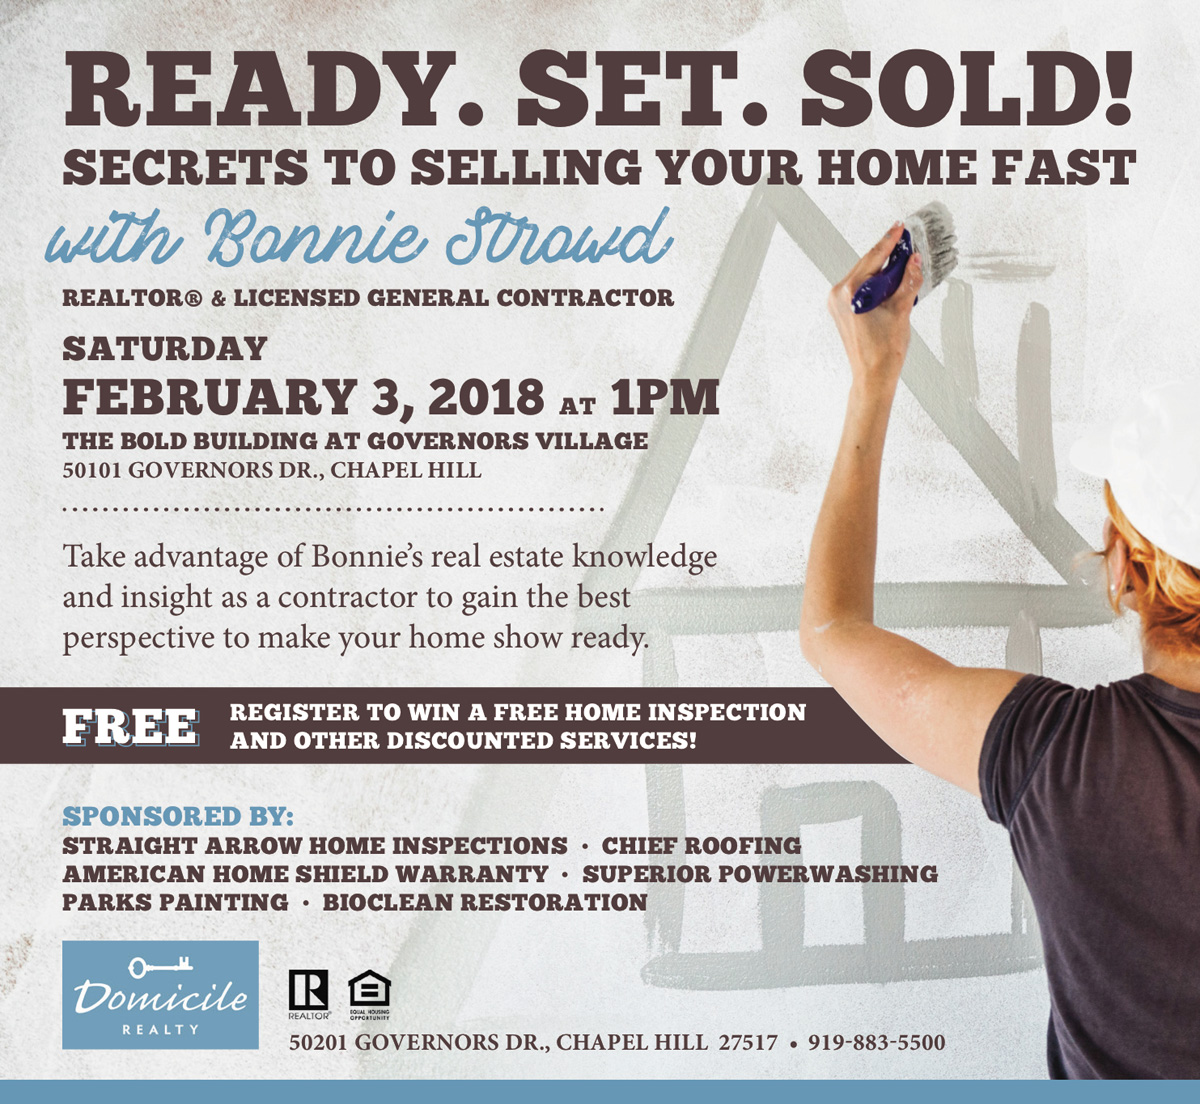 Ready, Set, Sold! for prospective home sellers on February 3, 1 PM, at the Bold Building, Governor's Village, Chapel Hill.